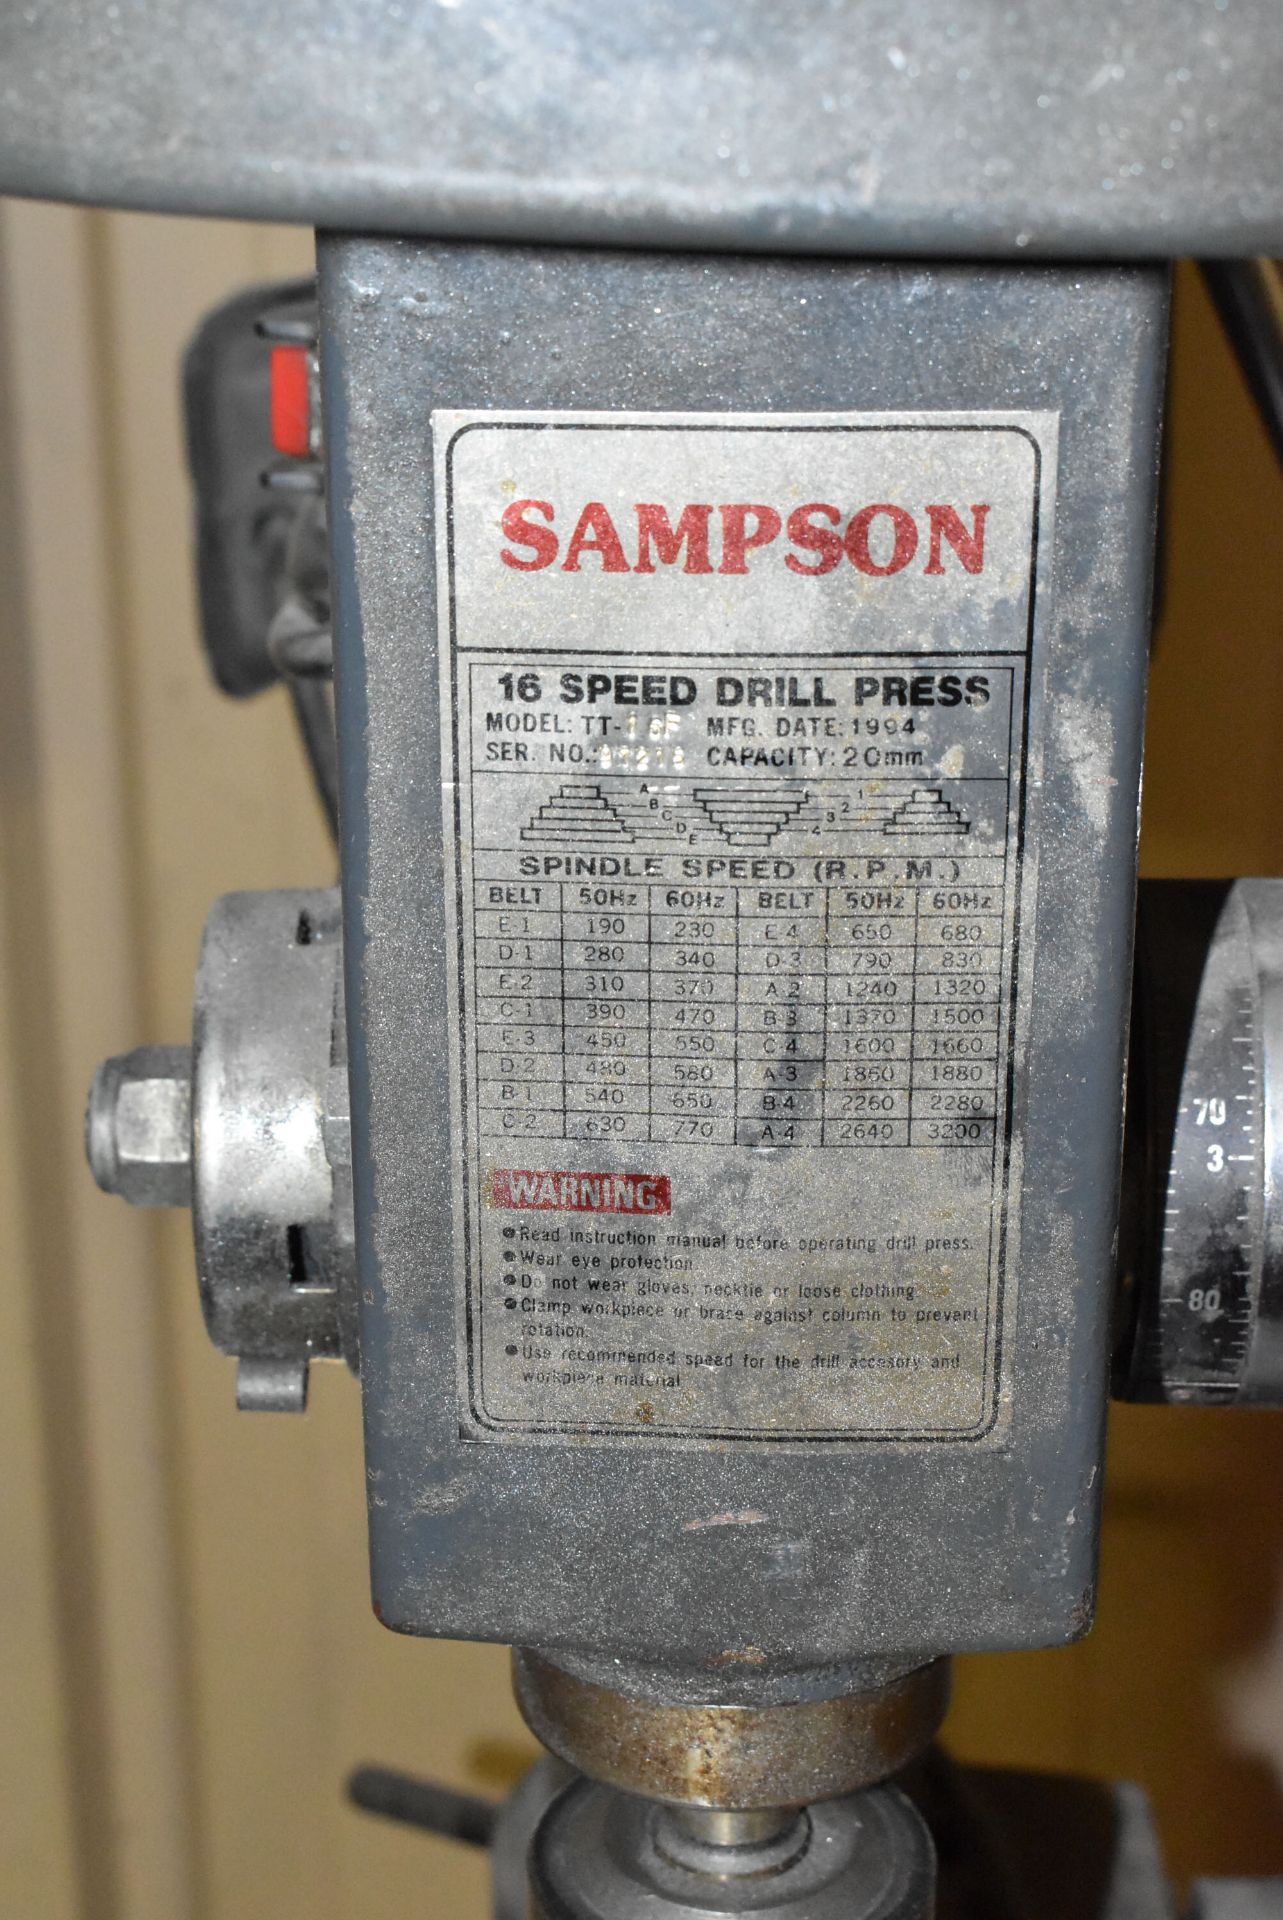 SAMPSON 16F 16 SPEED FLOOR TYPE DRILL PRESS WITH SPEEDS TO 3600RPM, S/N 97215 [RIGGING FOR FOR - Image 2 of 3